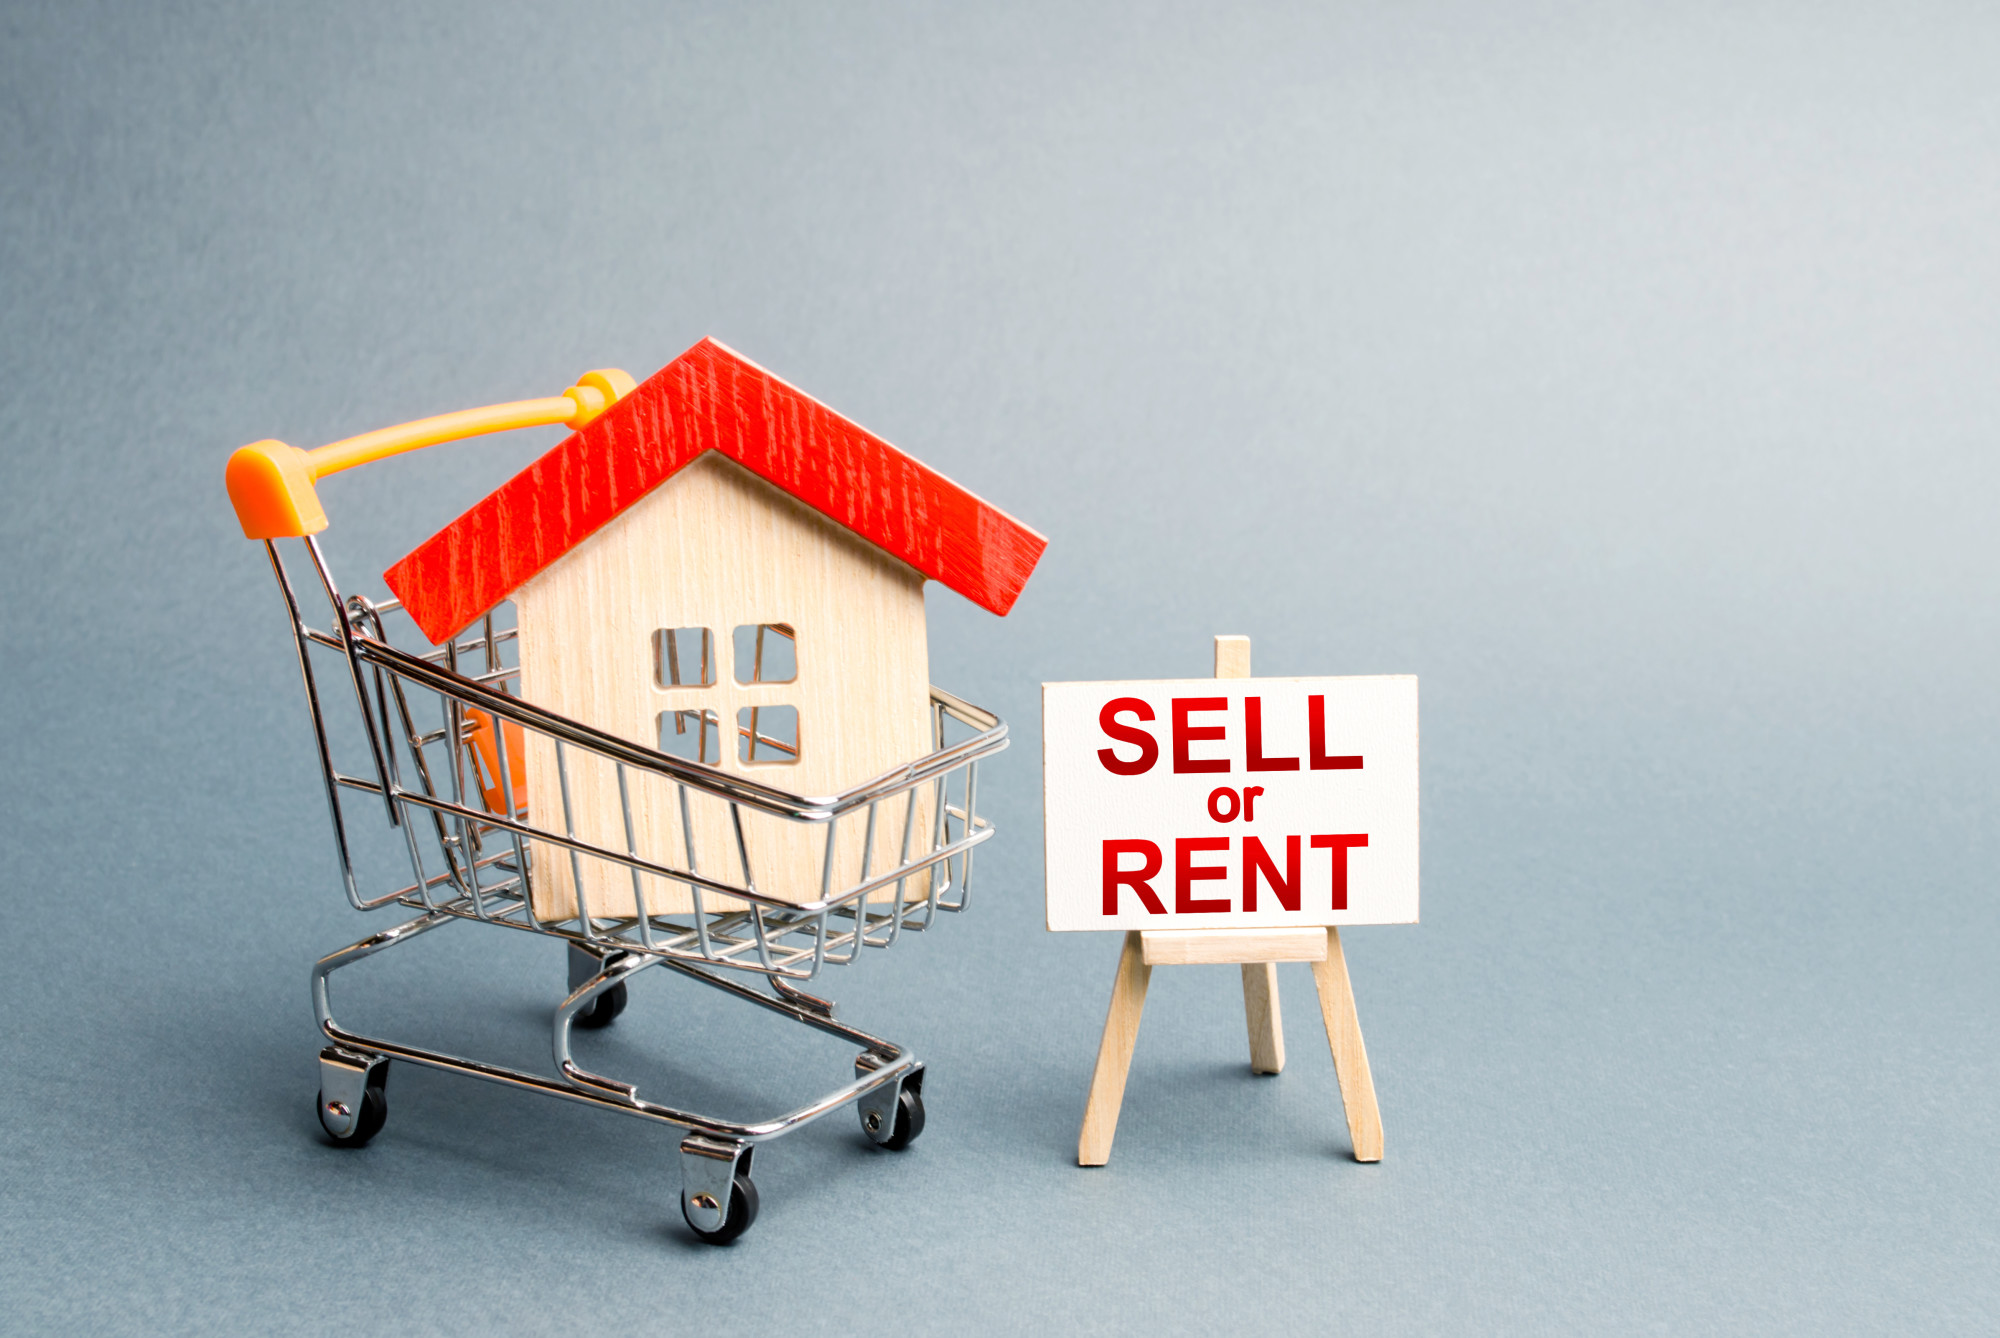 Renting vs. Selling a Home: Should I Sell My House or Rent It Out?